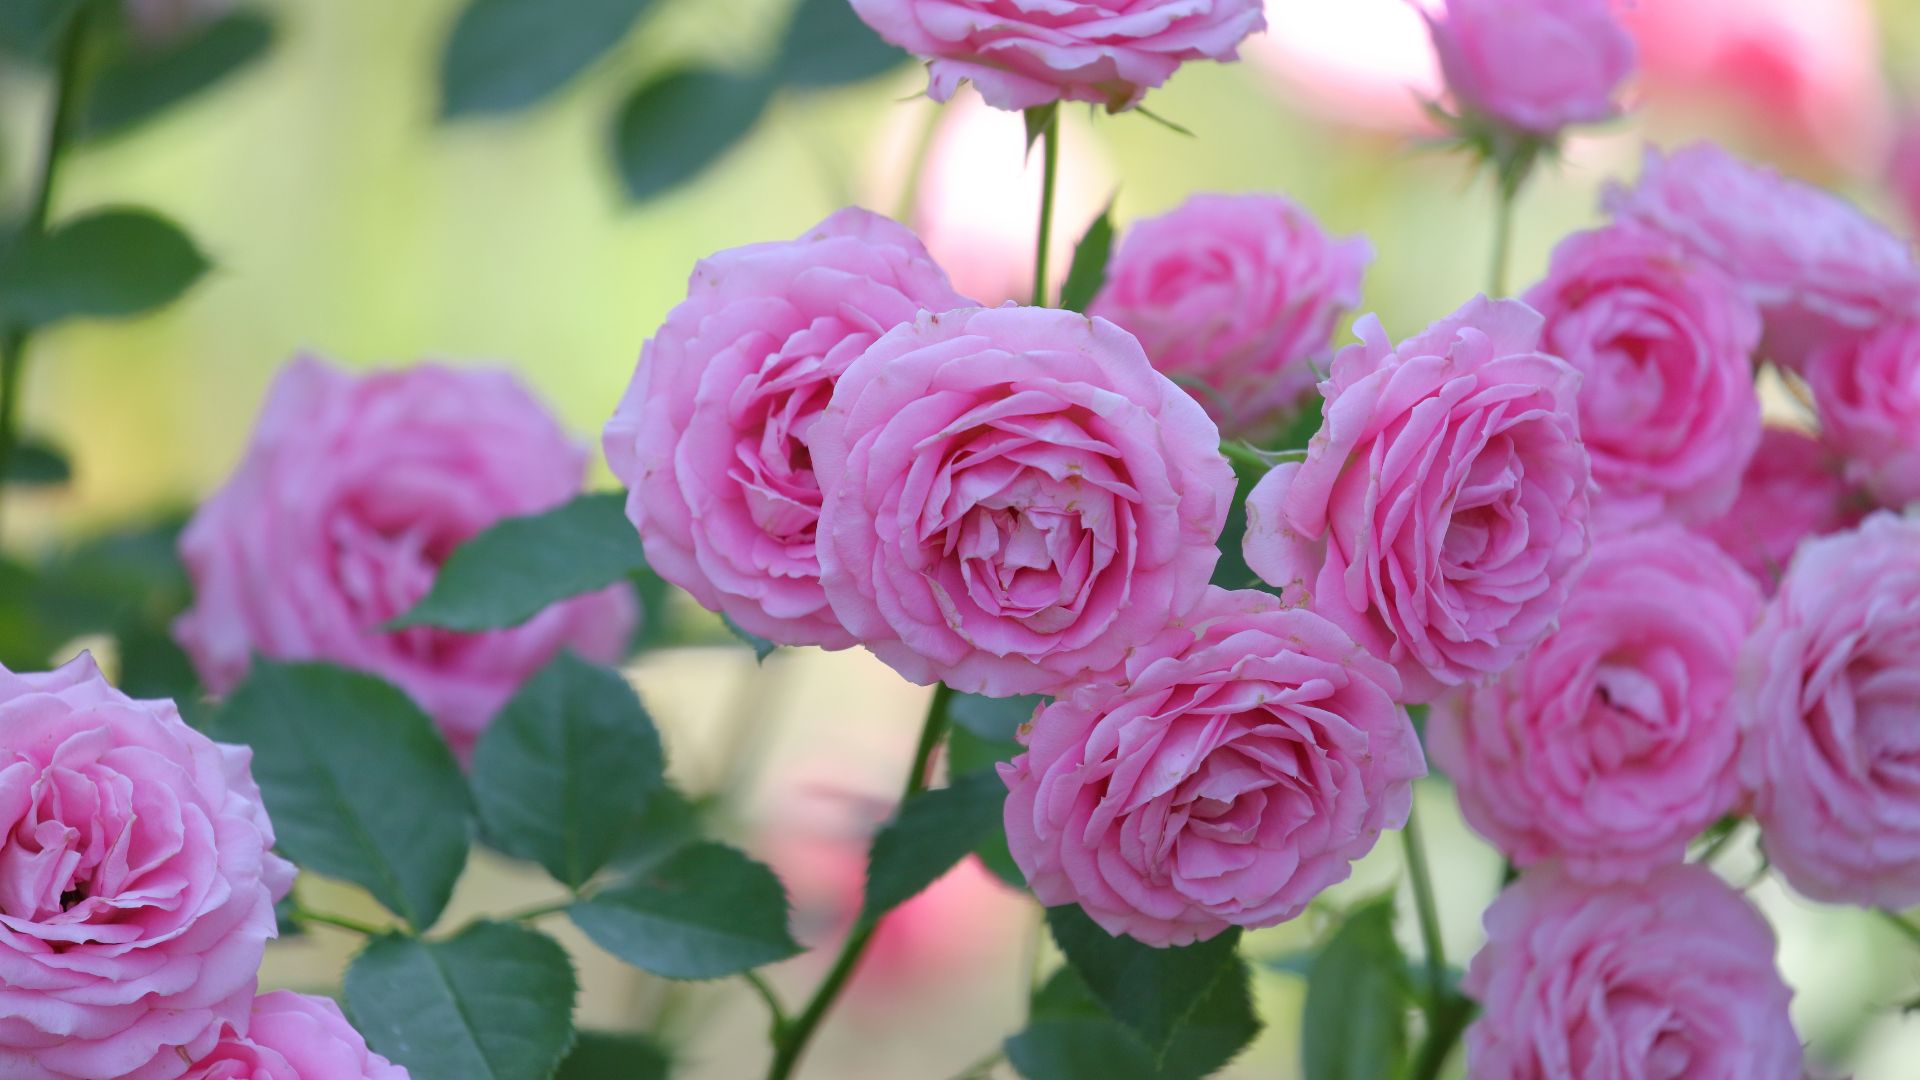 Follow These 4 Easy Steps To Effortlessly Transplant Your Roses And Maximize Their Beauty 